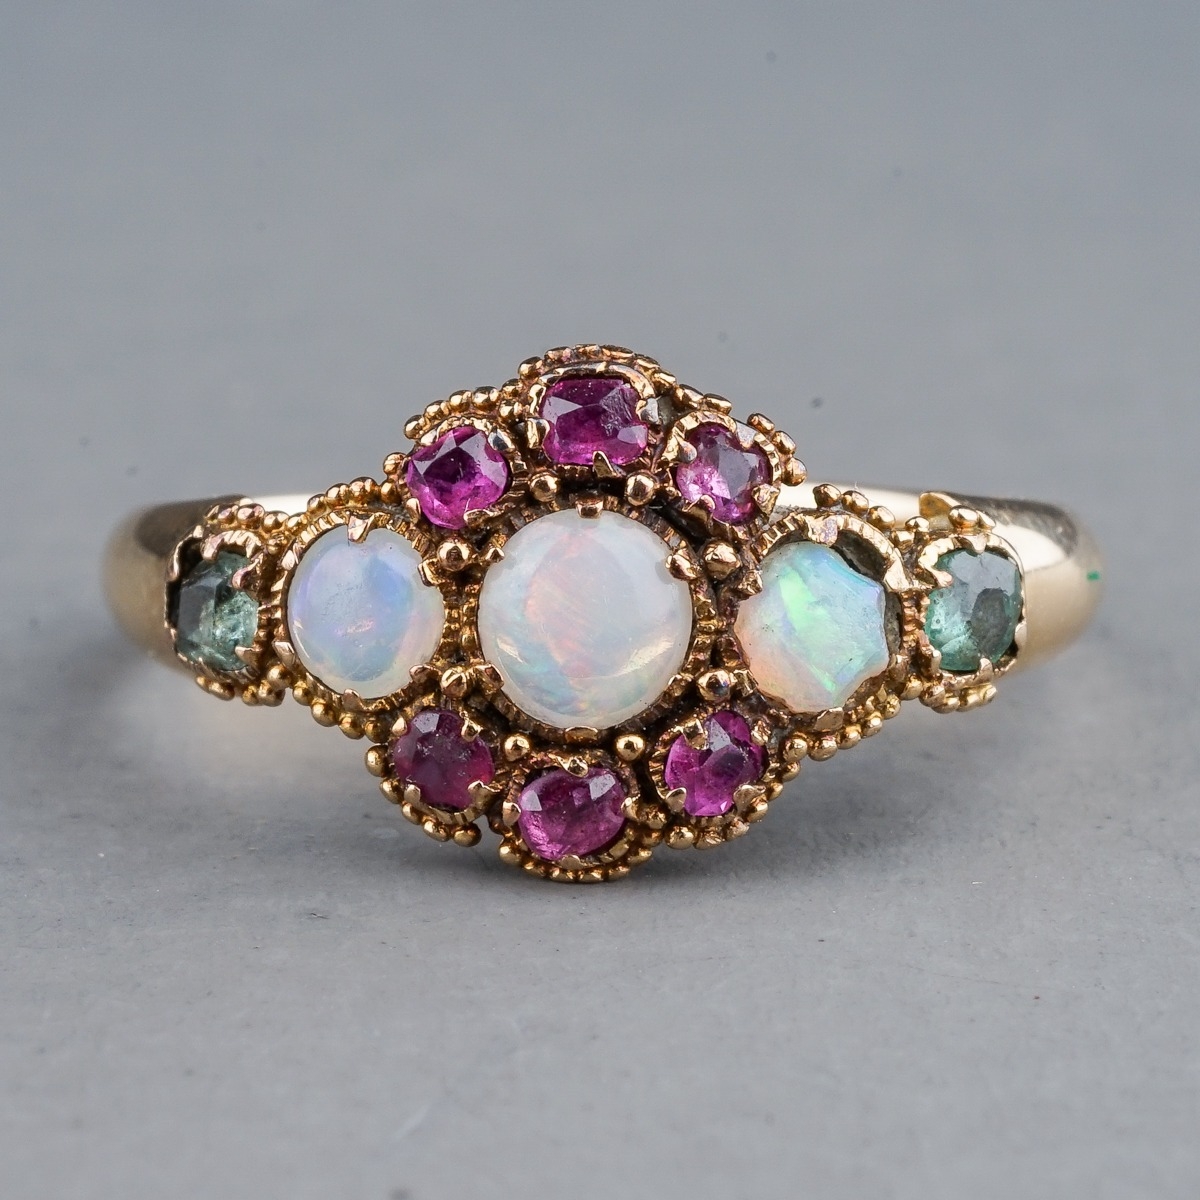 An early 20th century yellow gold opal cluster ring, set with three round cabochon opals within a - Image 2 of 3